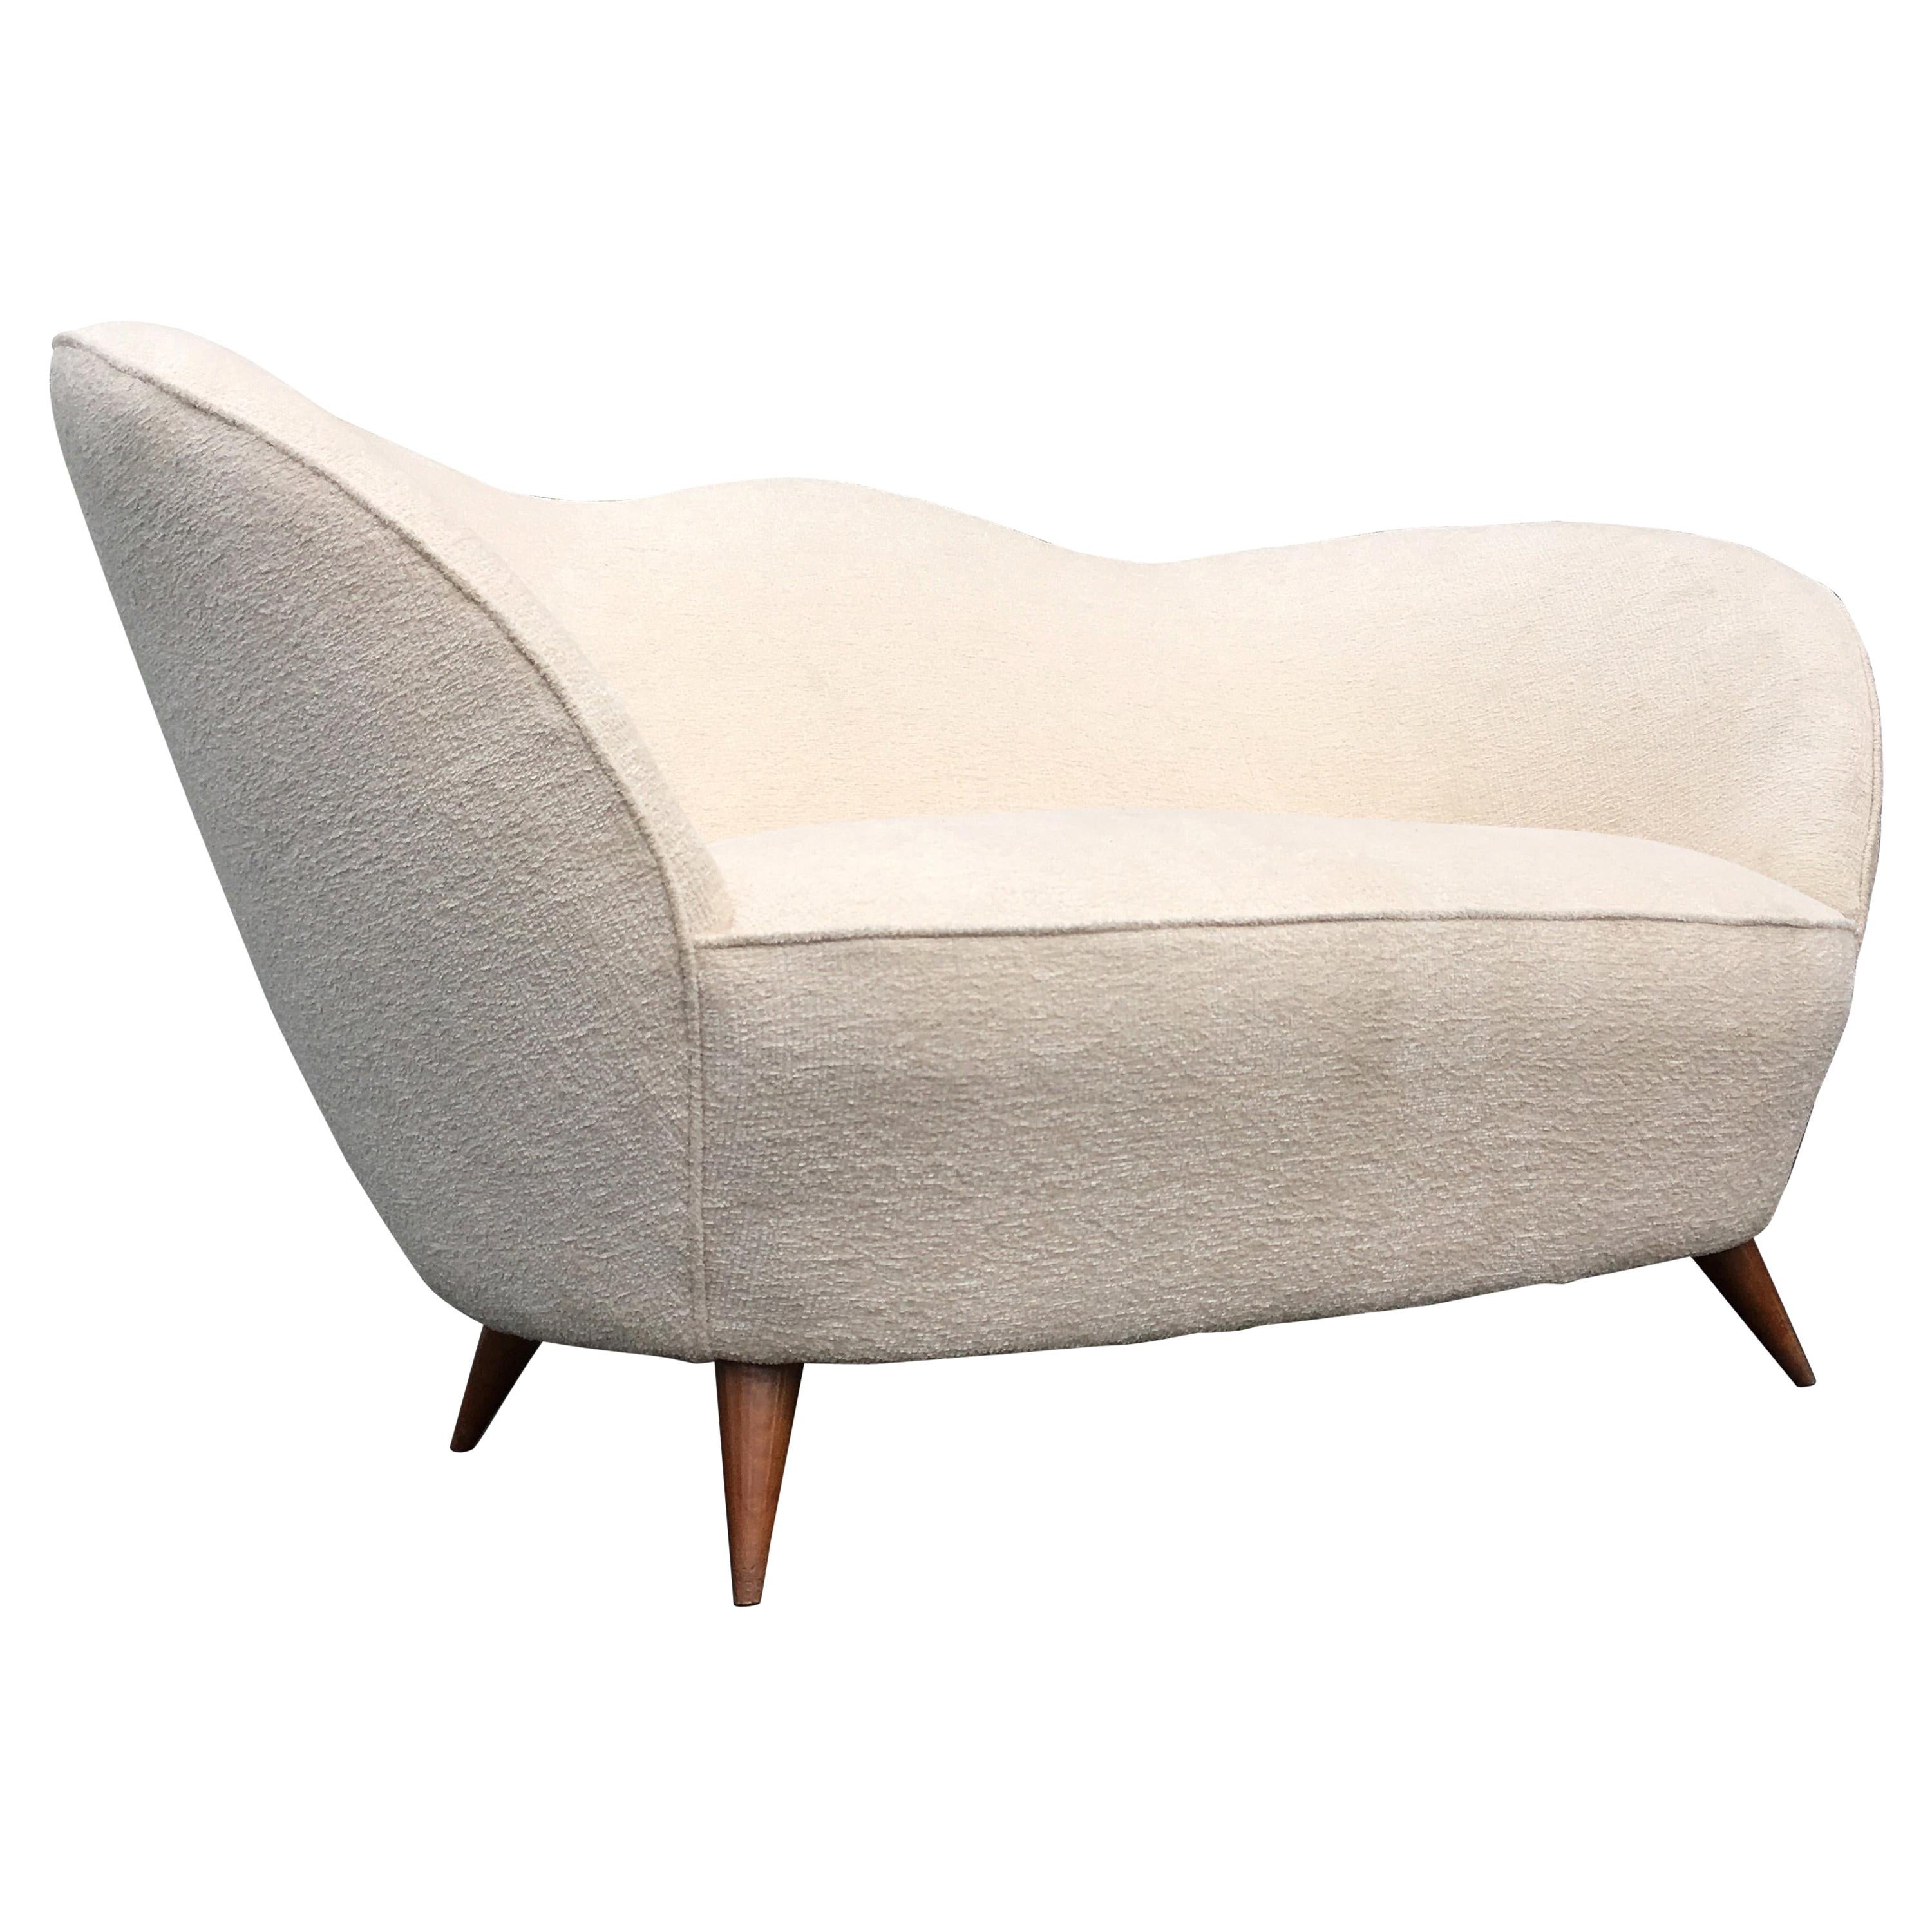 Italian Sofa in the Style of Gio Ponti, 1950s For Sale